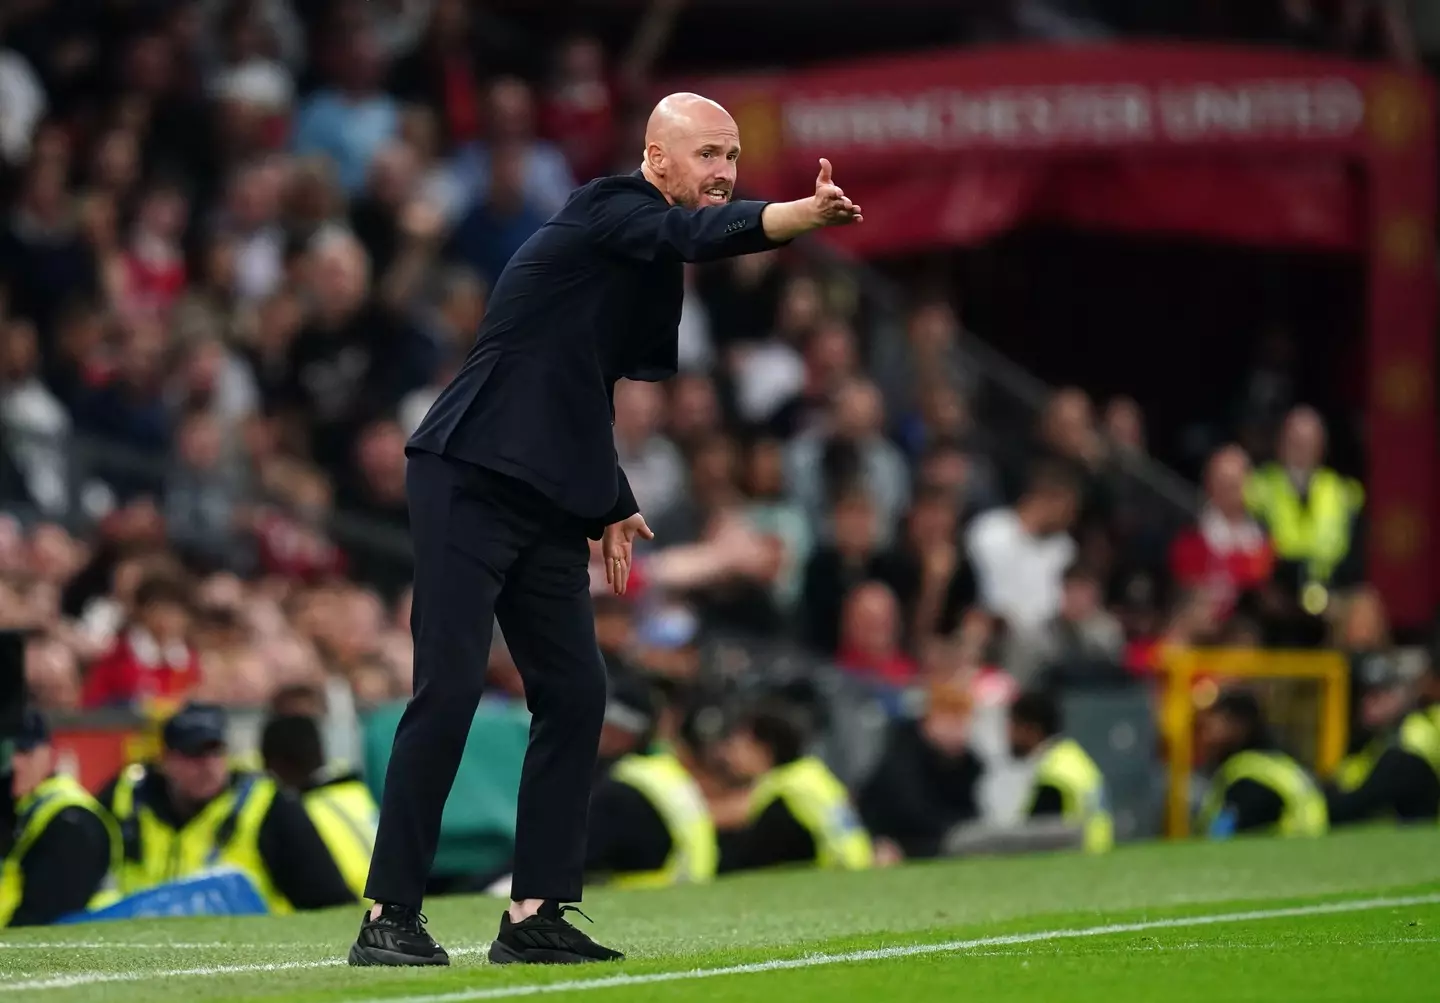 Erik ten Hag is always very active on the Manchester United touchline (Alamy)